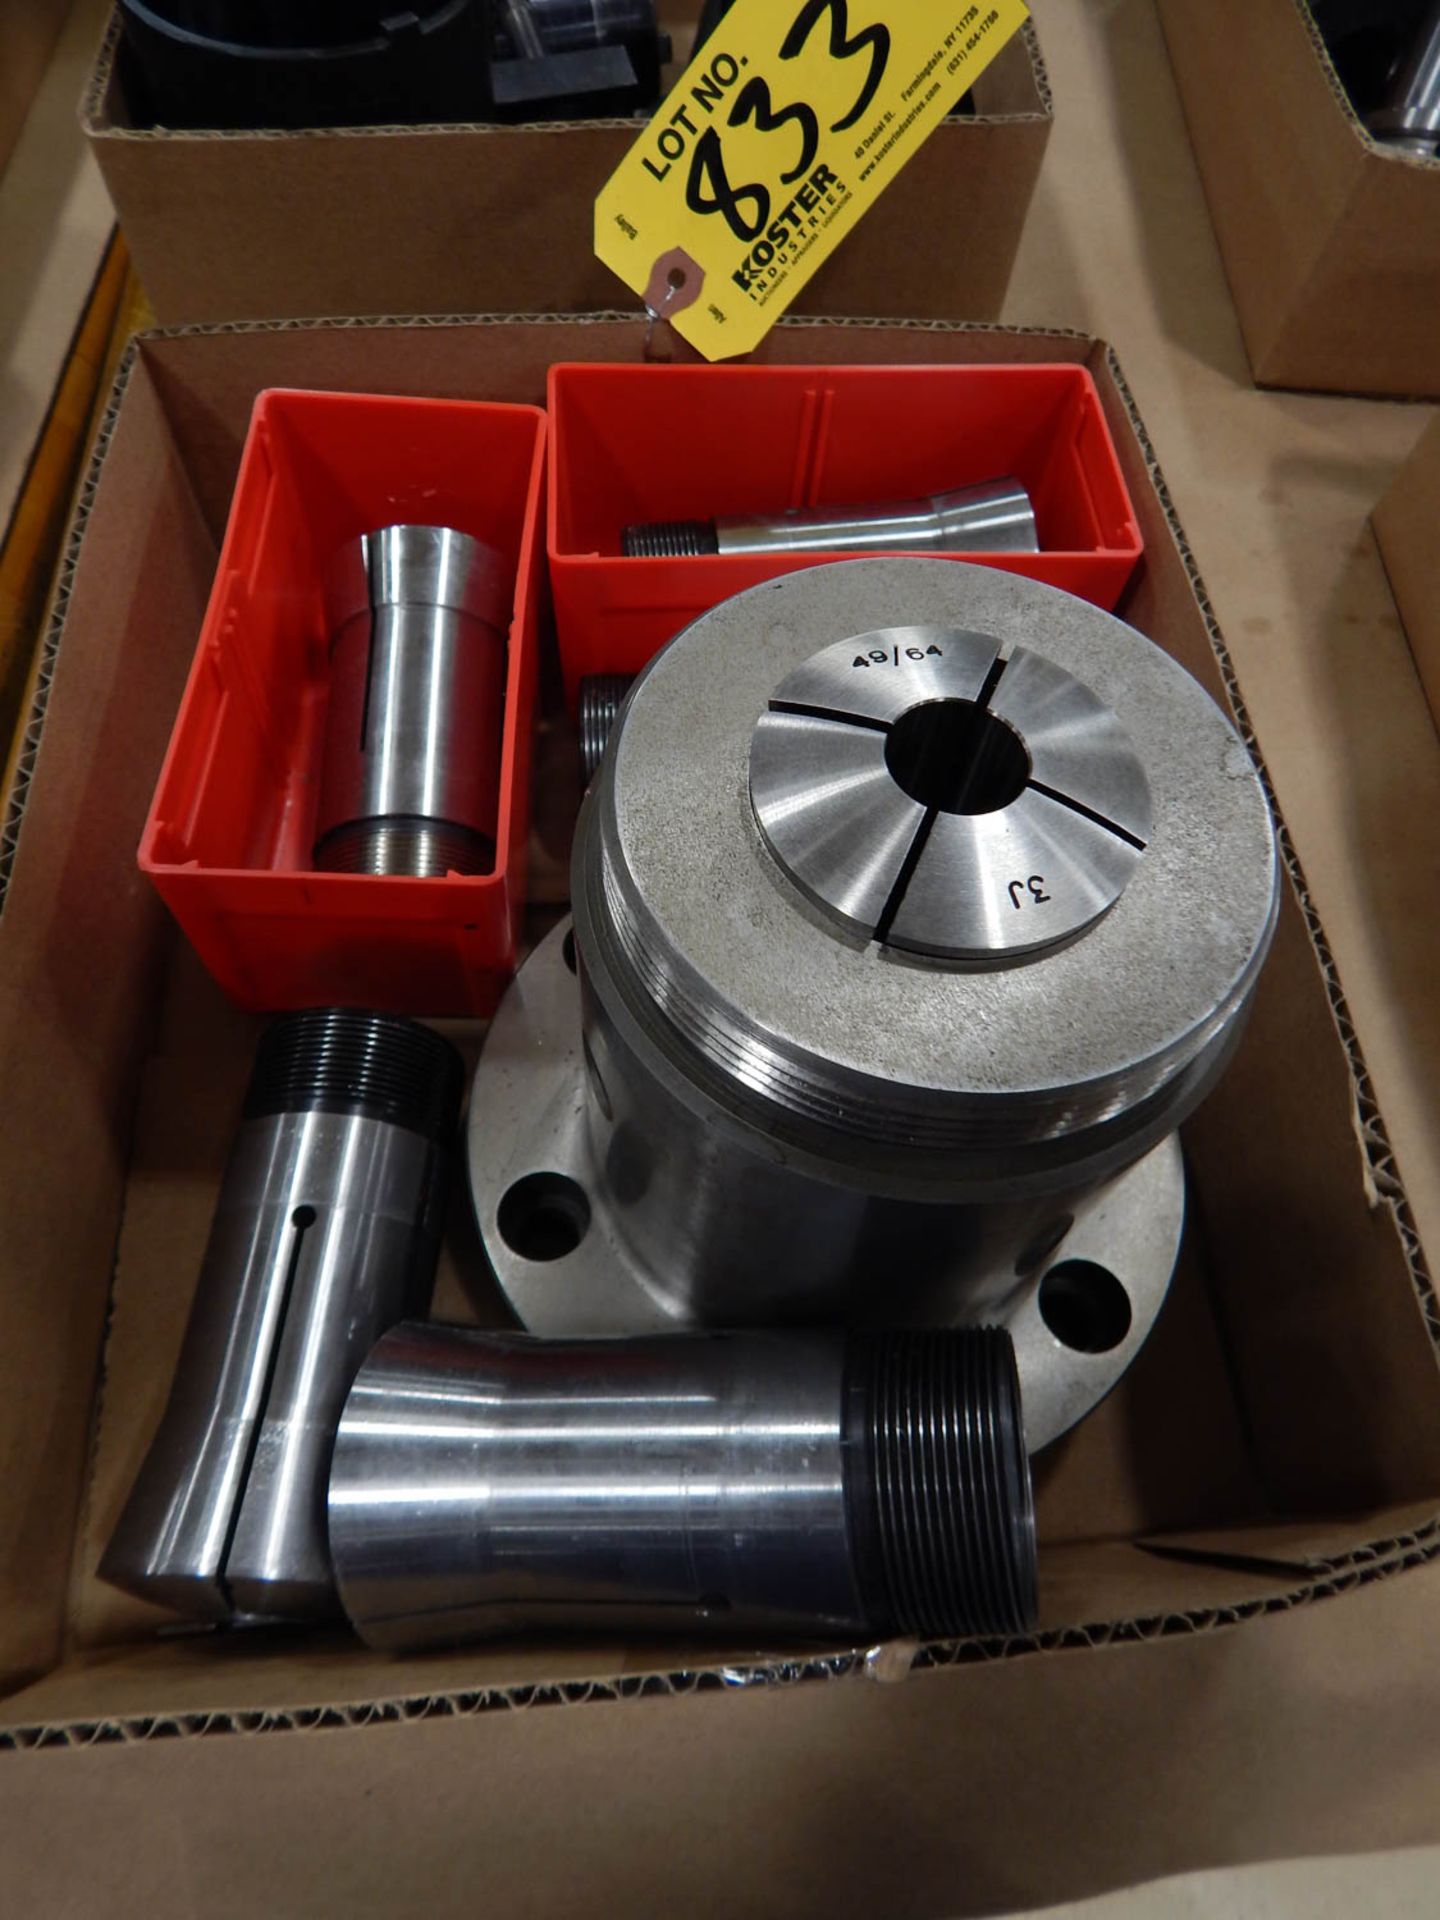 3J COLLET NOSE CHUCK, WITH COLLETS